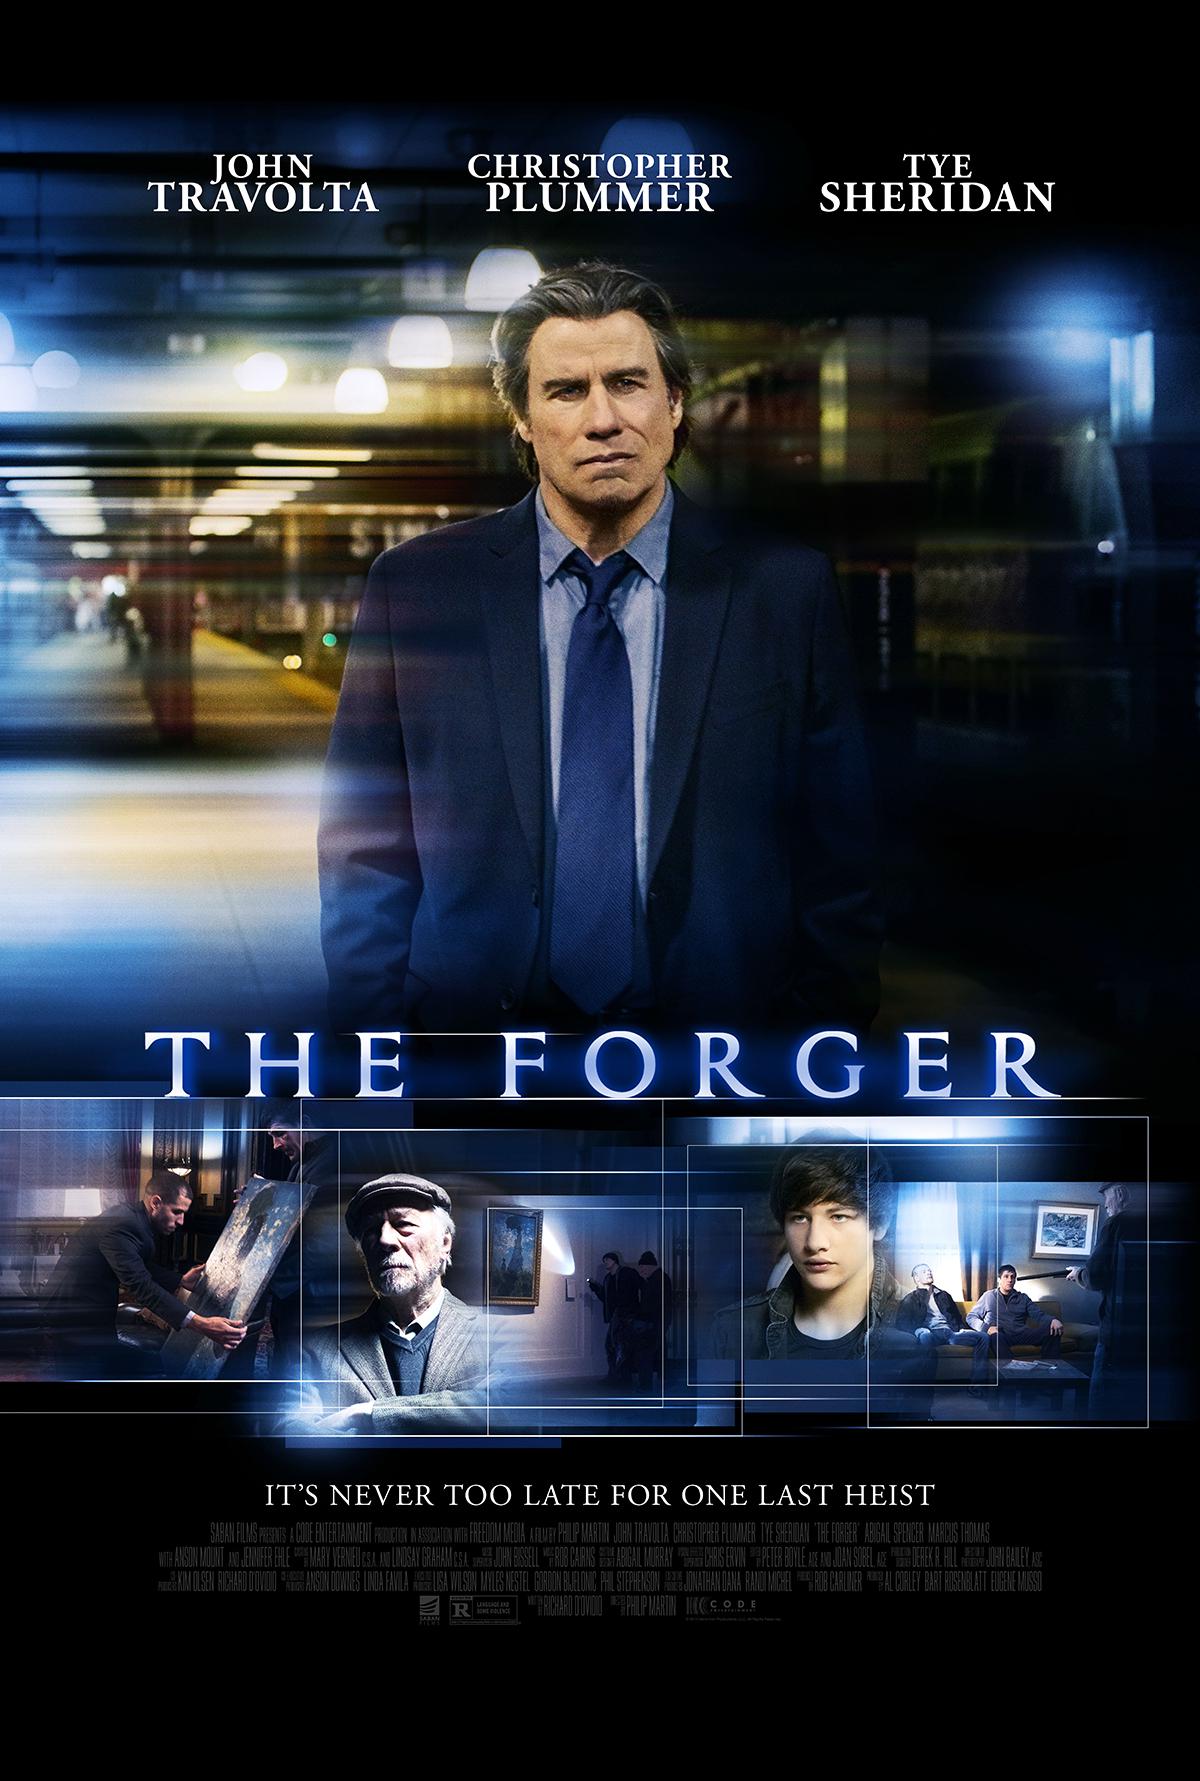 The Forger Movie Review